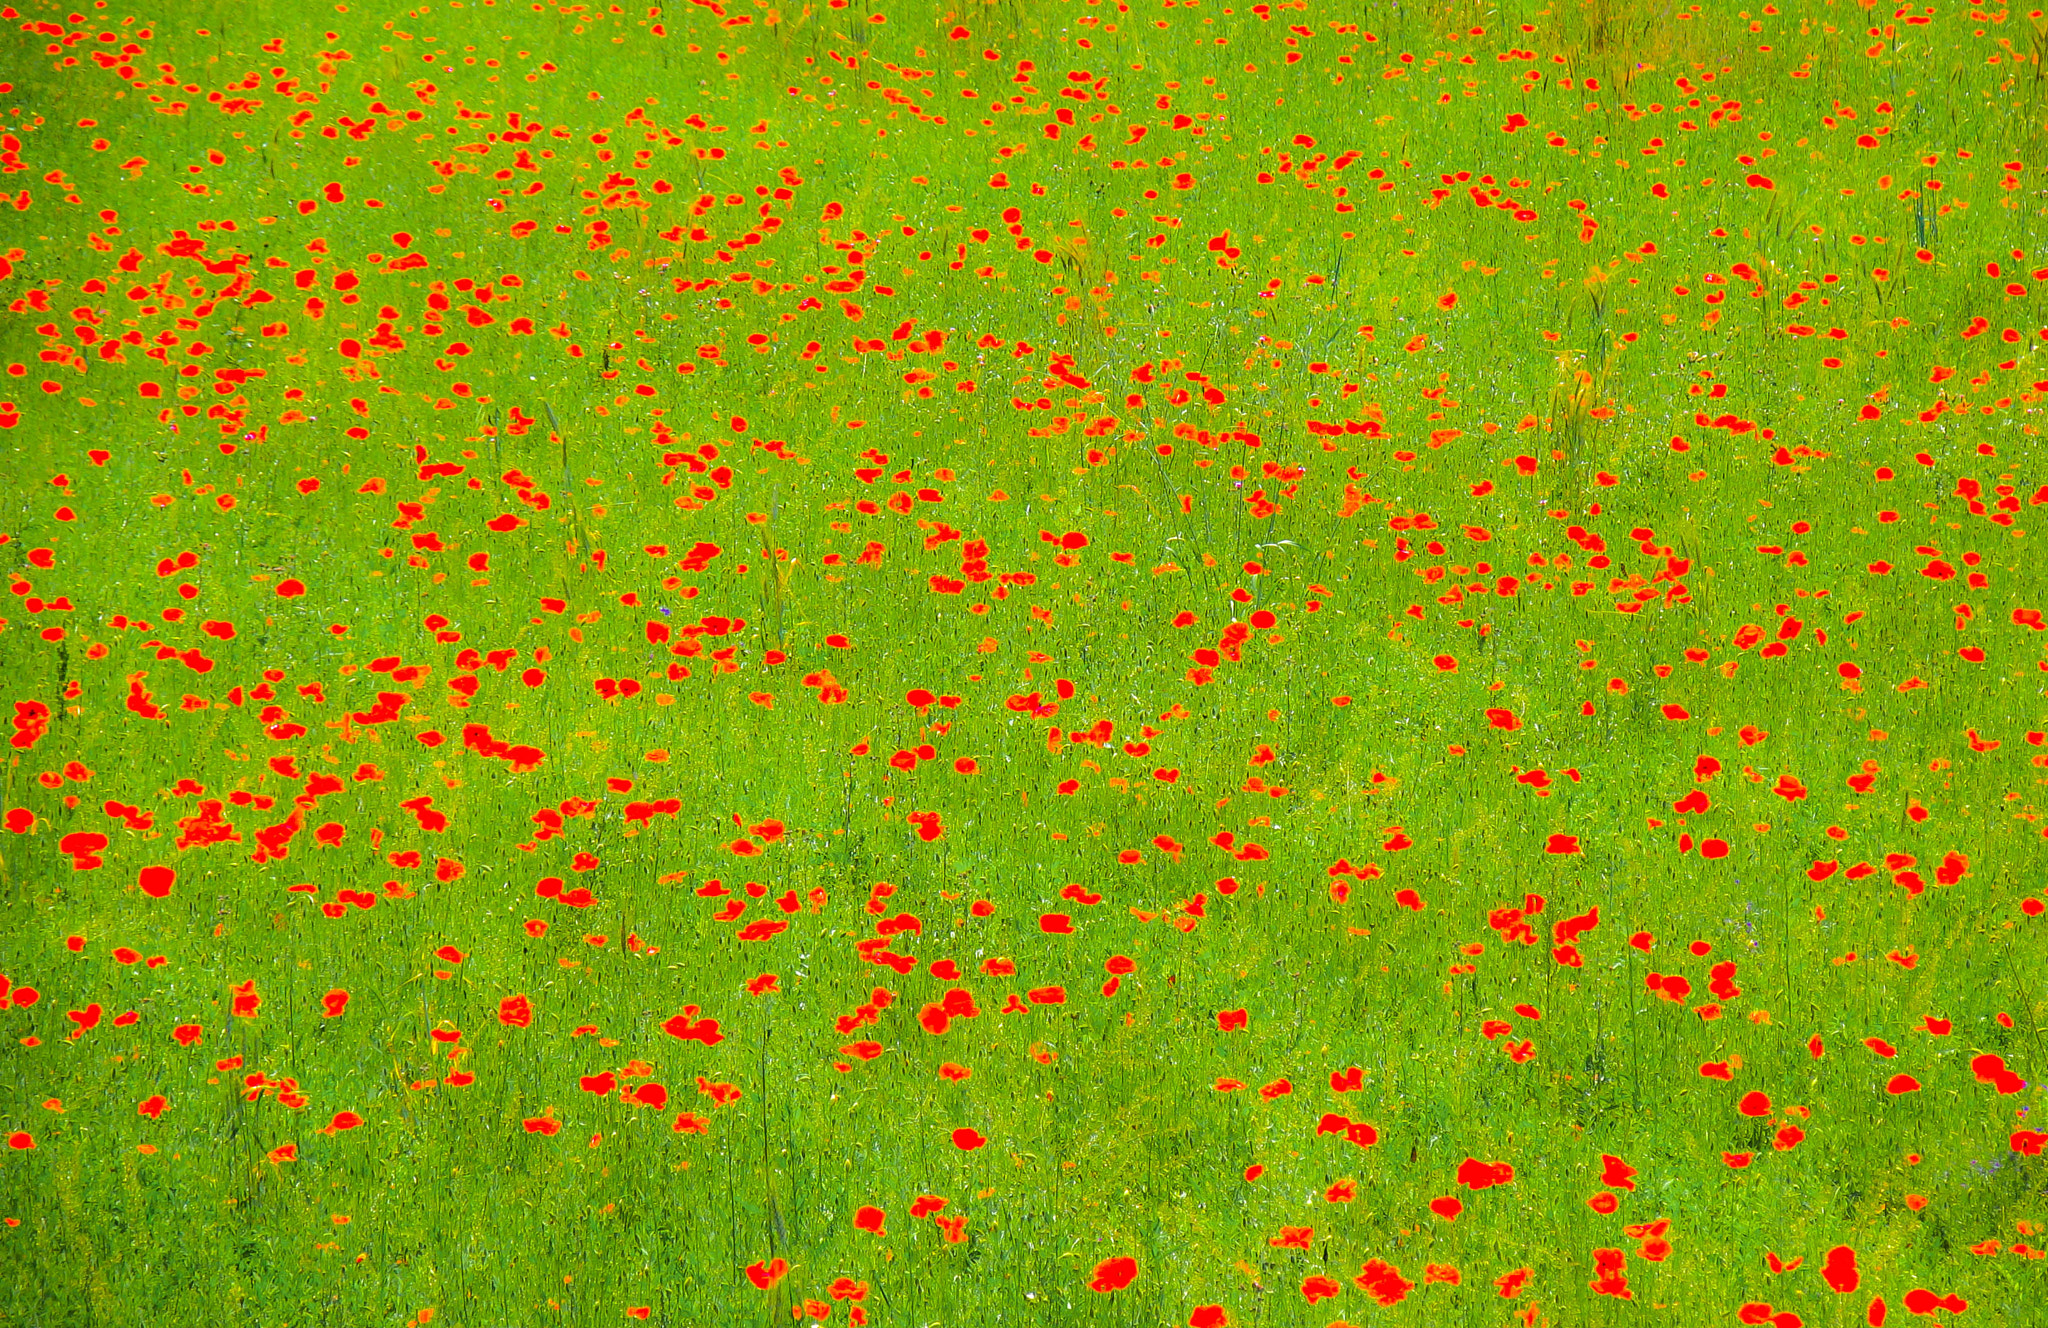 Canon POWERSHOT PRO1 sample photo. Red dots on green ground photography